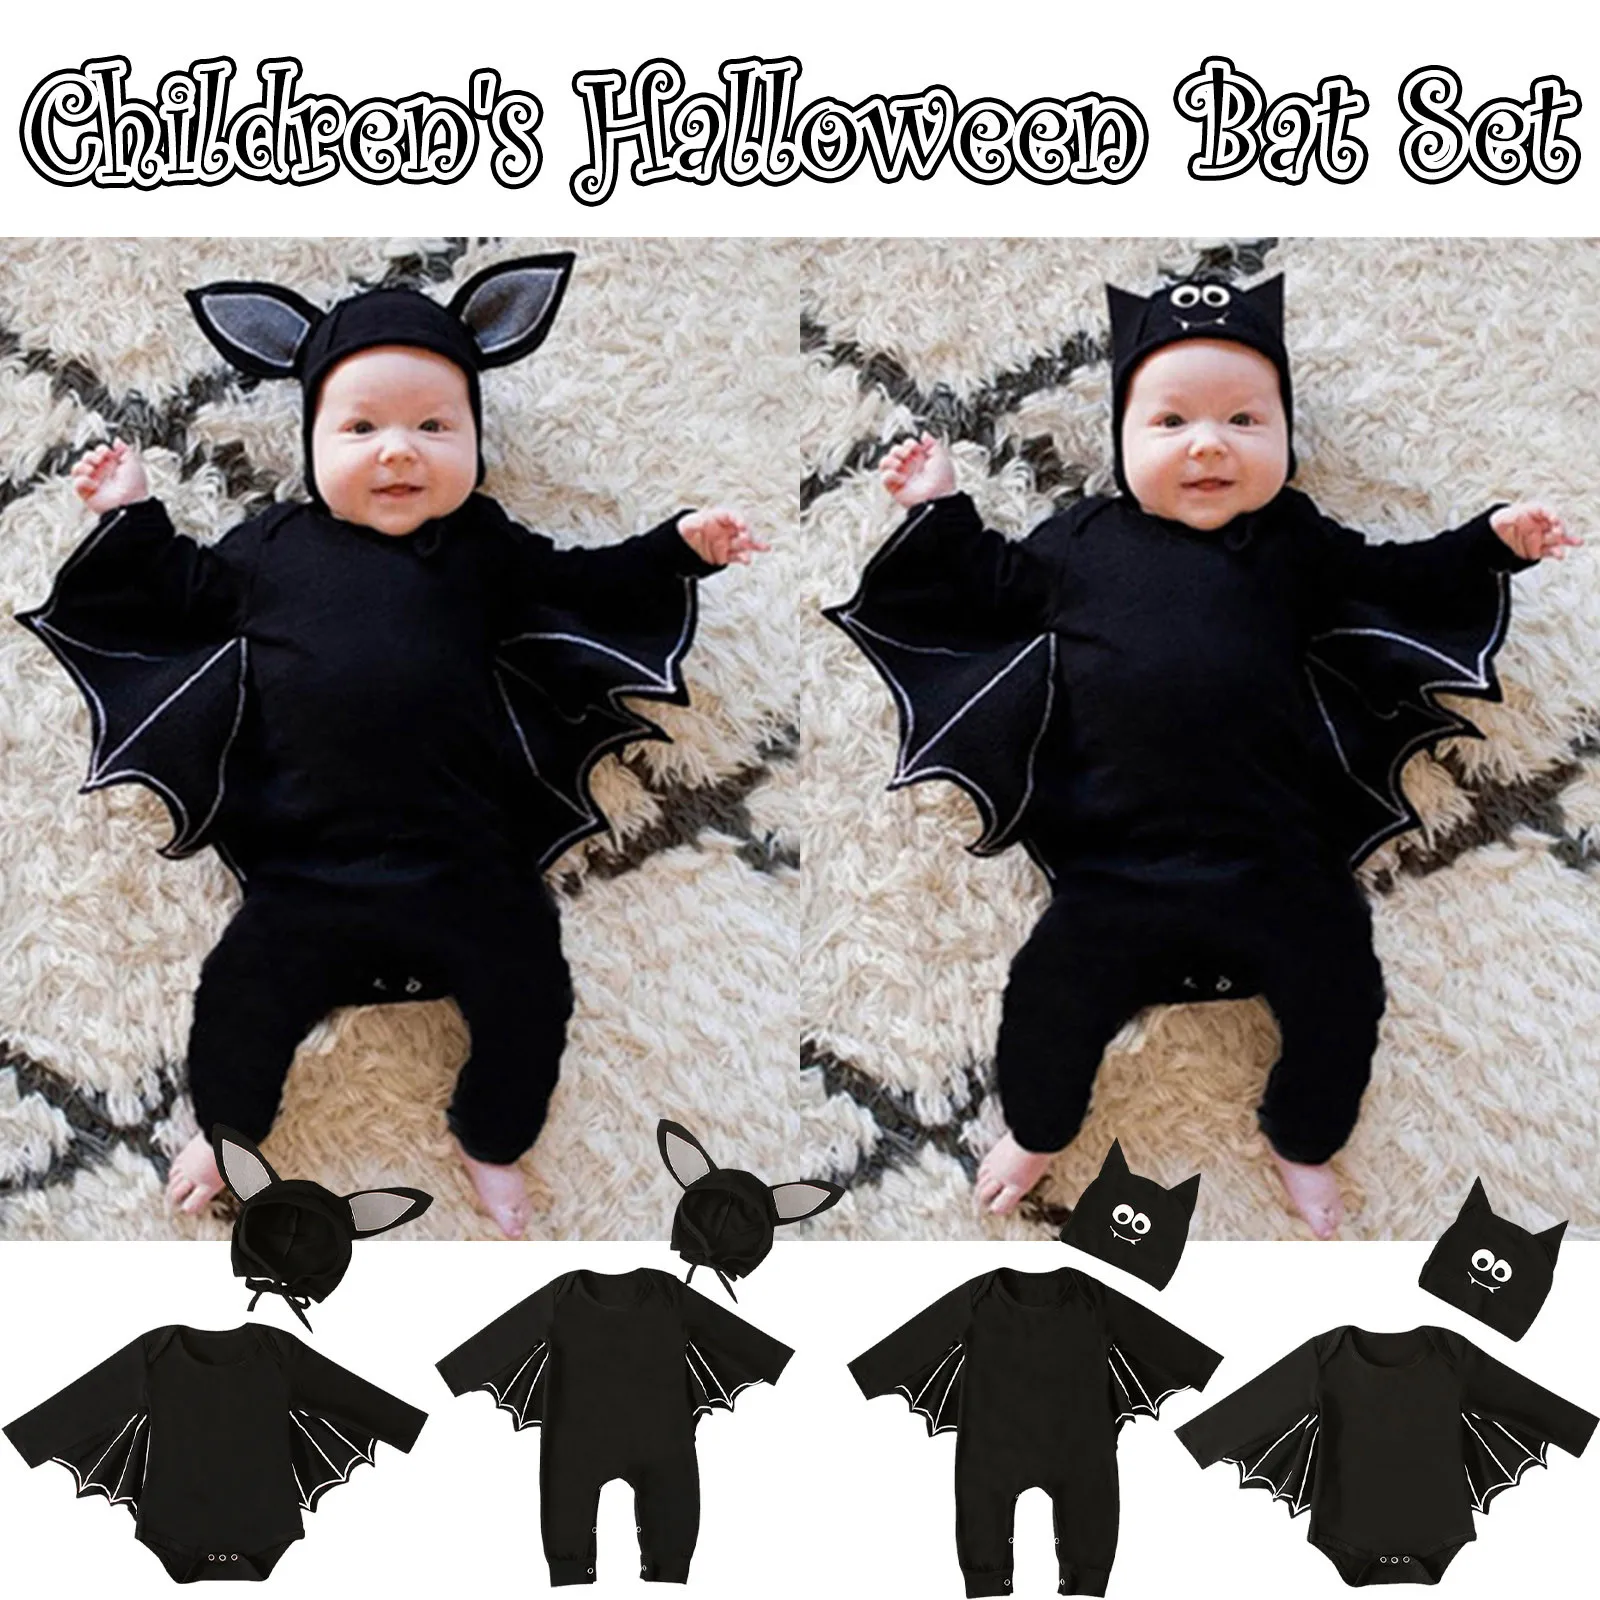 FDSD Clothes Halloween Romper for Infant Baby Boy Girl Autumn Bat Cosplay Costume Long Sleeve Balck Jumpsuit with Hat 